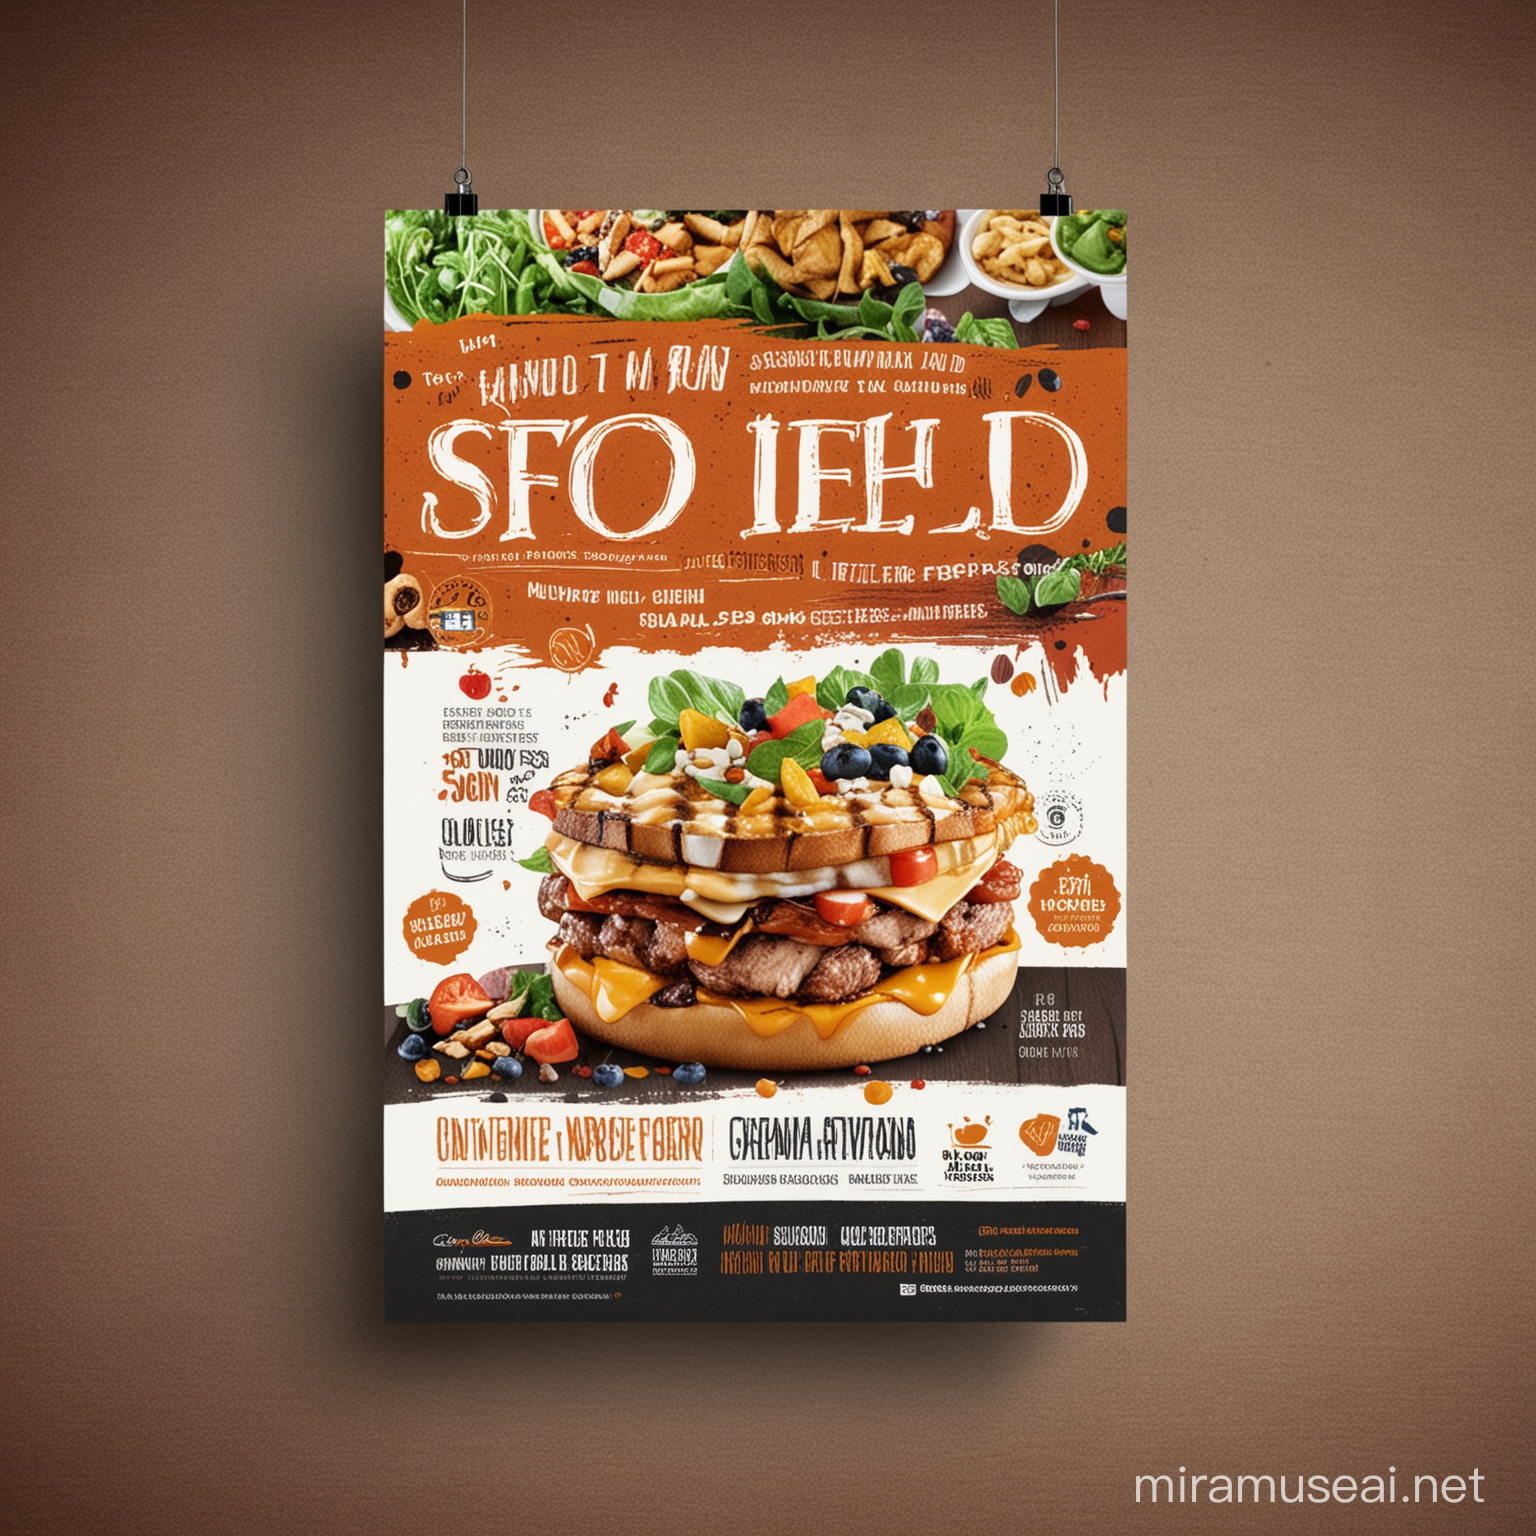 Vibrant Food Field Advertising Poster for Social Media and Graphic Design Work Services